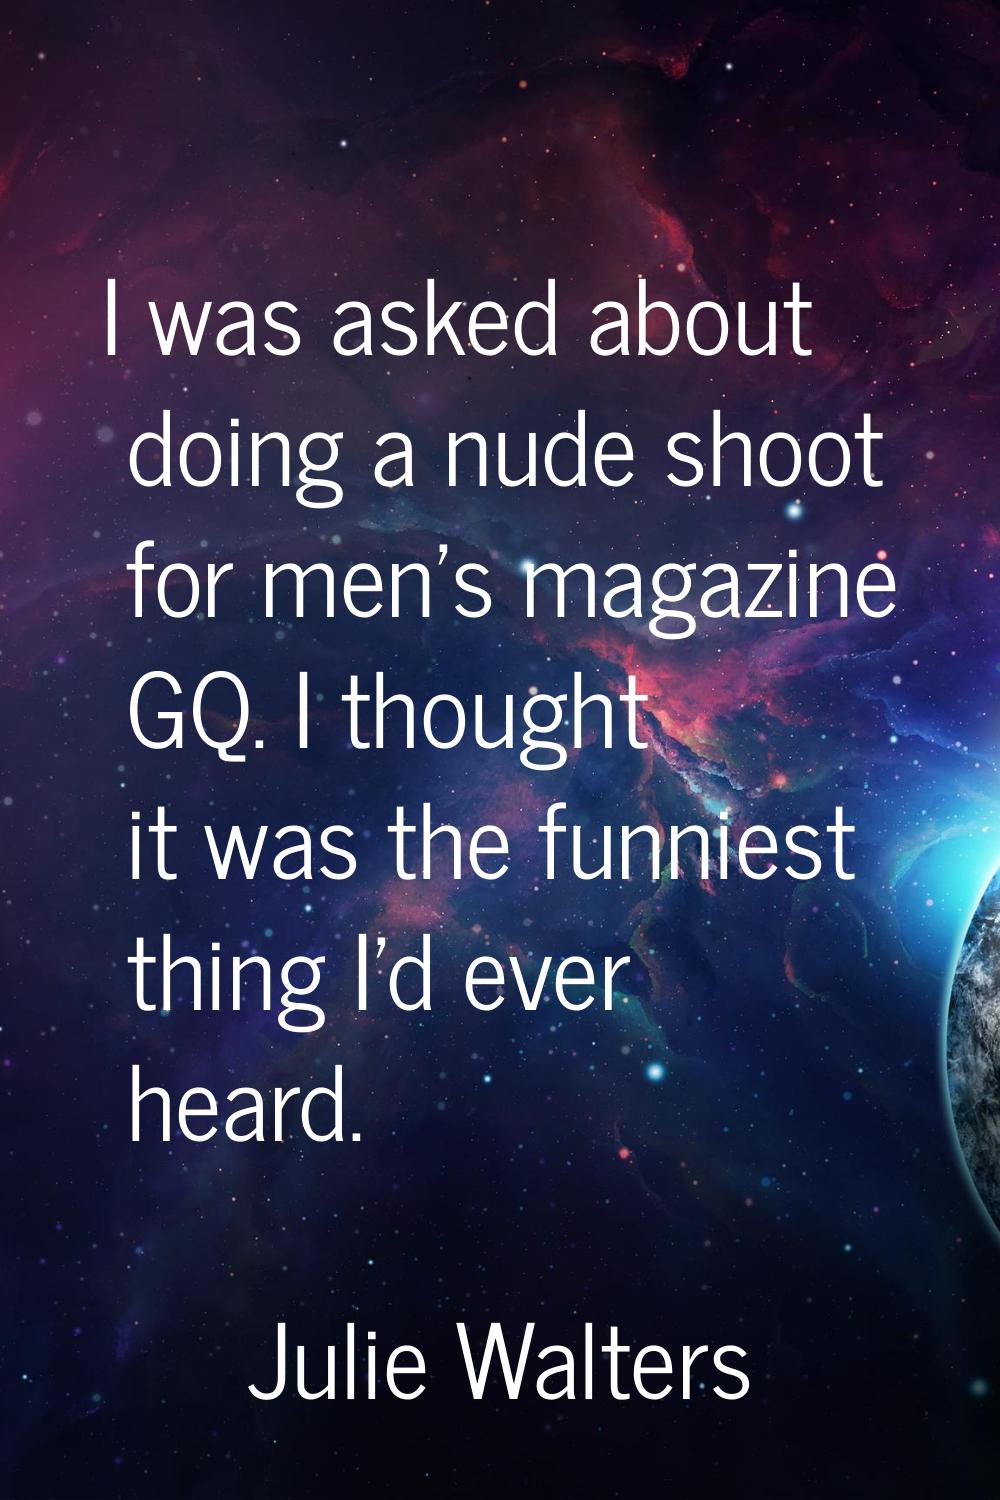 I was asked about doing a nude shoot for men's magazine GQ. I thought it was the funniest thing I'd